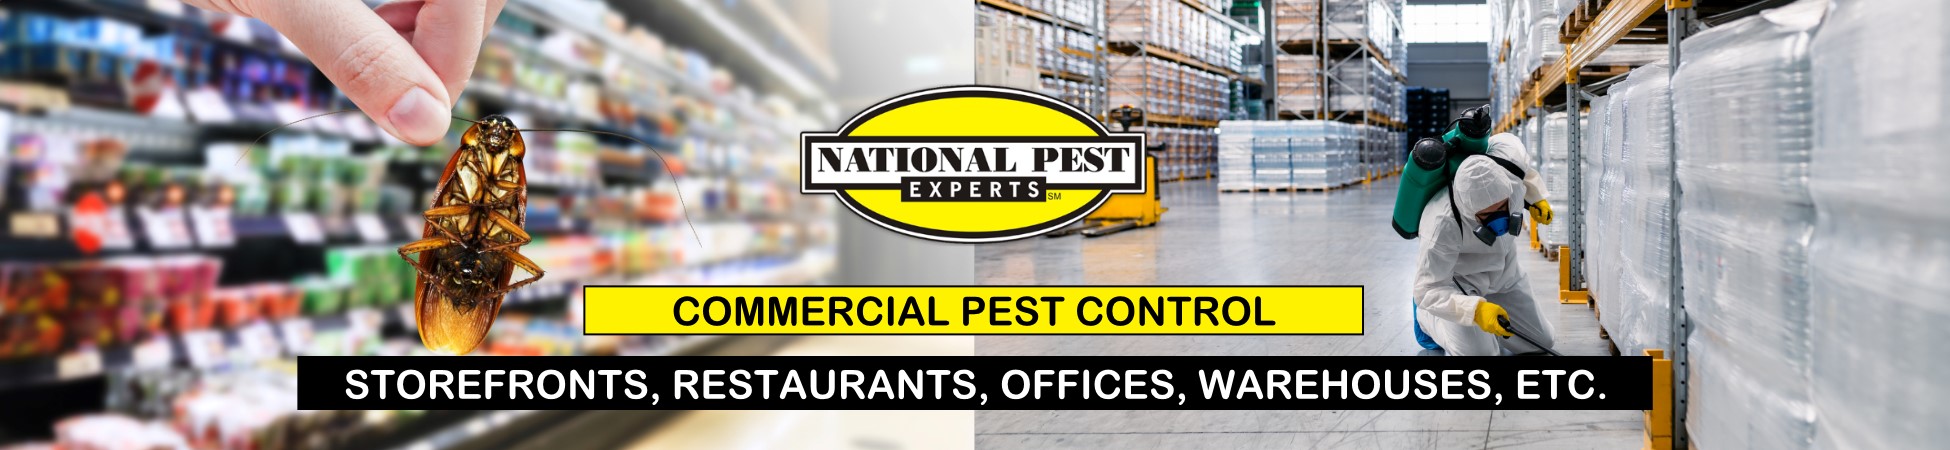 National Pest Experts - Commercial & Industrial exterminating and pest control in Farmingdale, NY